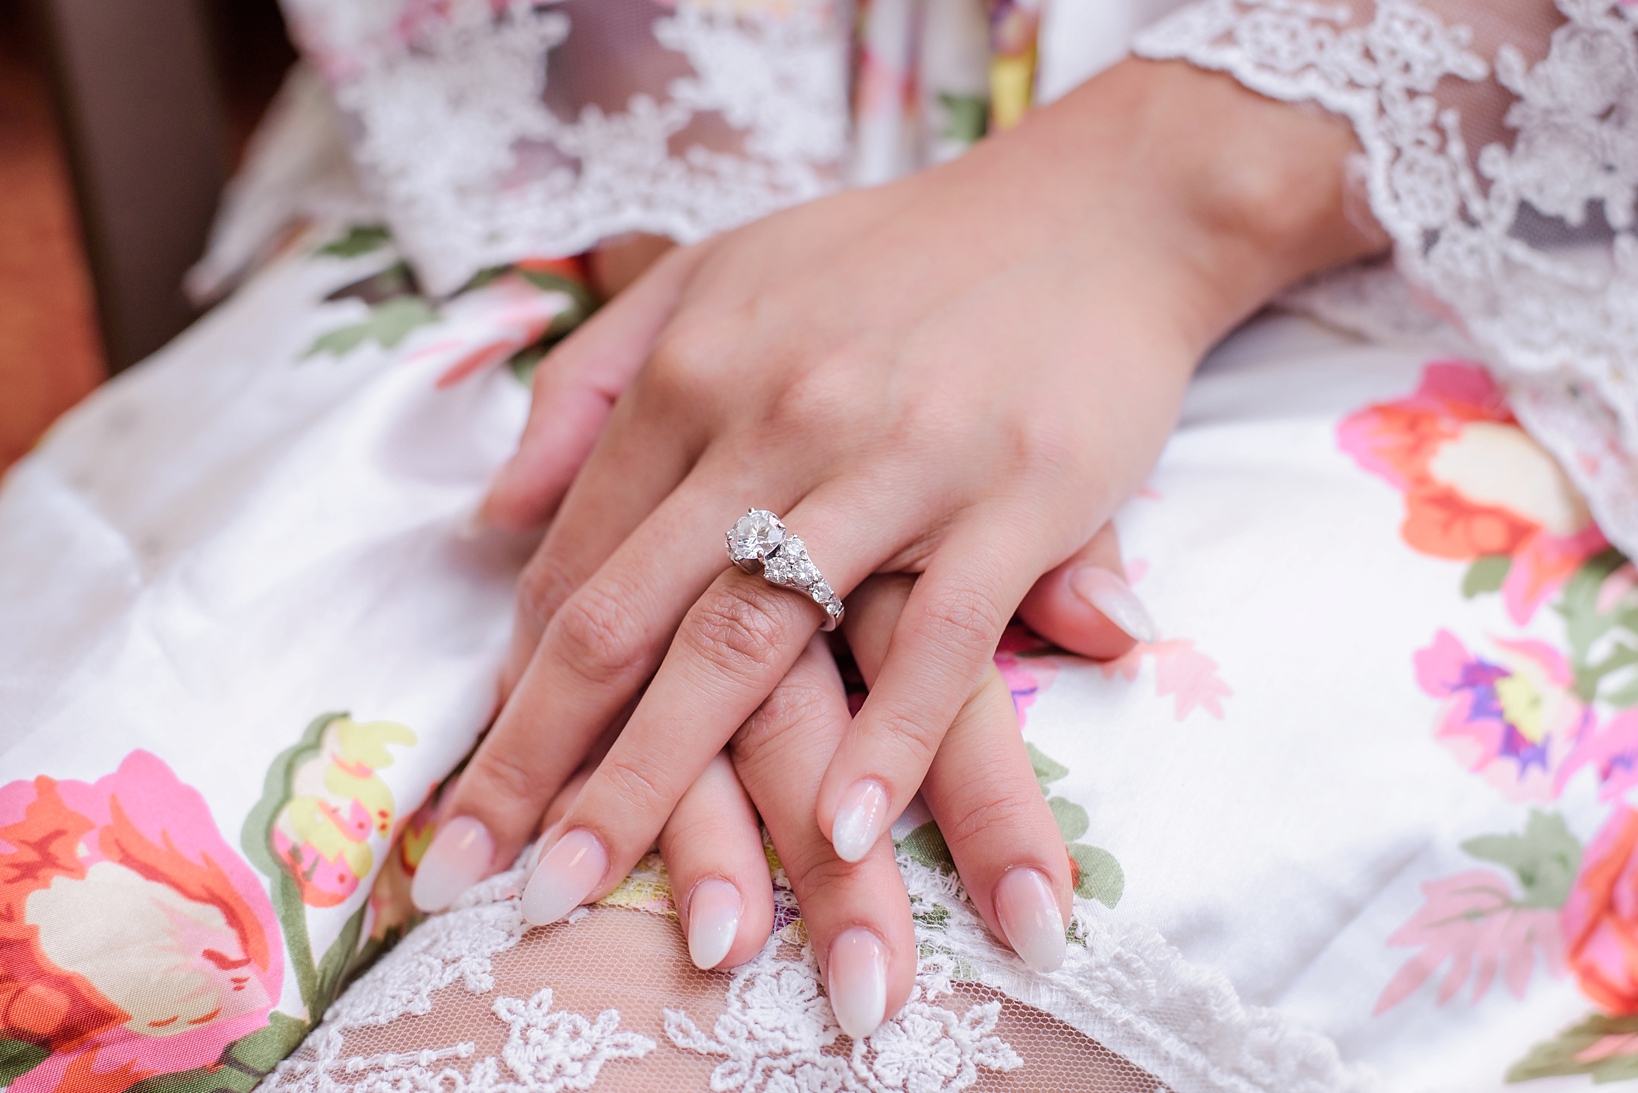 The bride's hand with her engagement ring